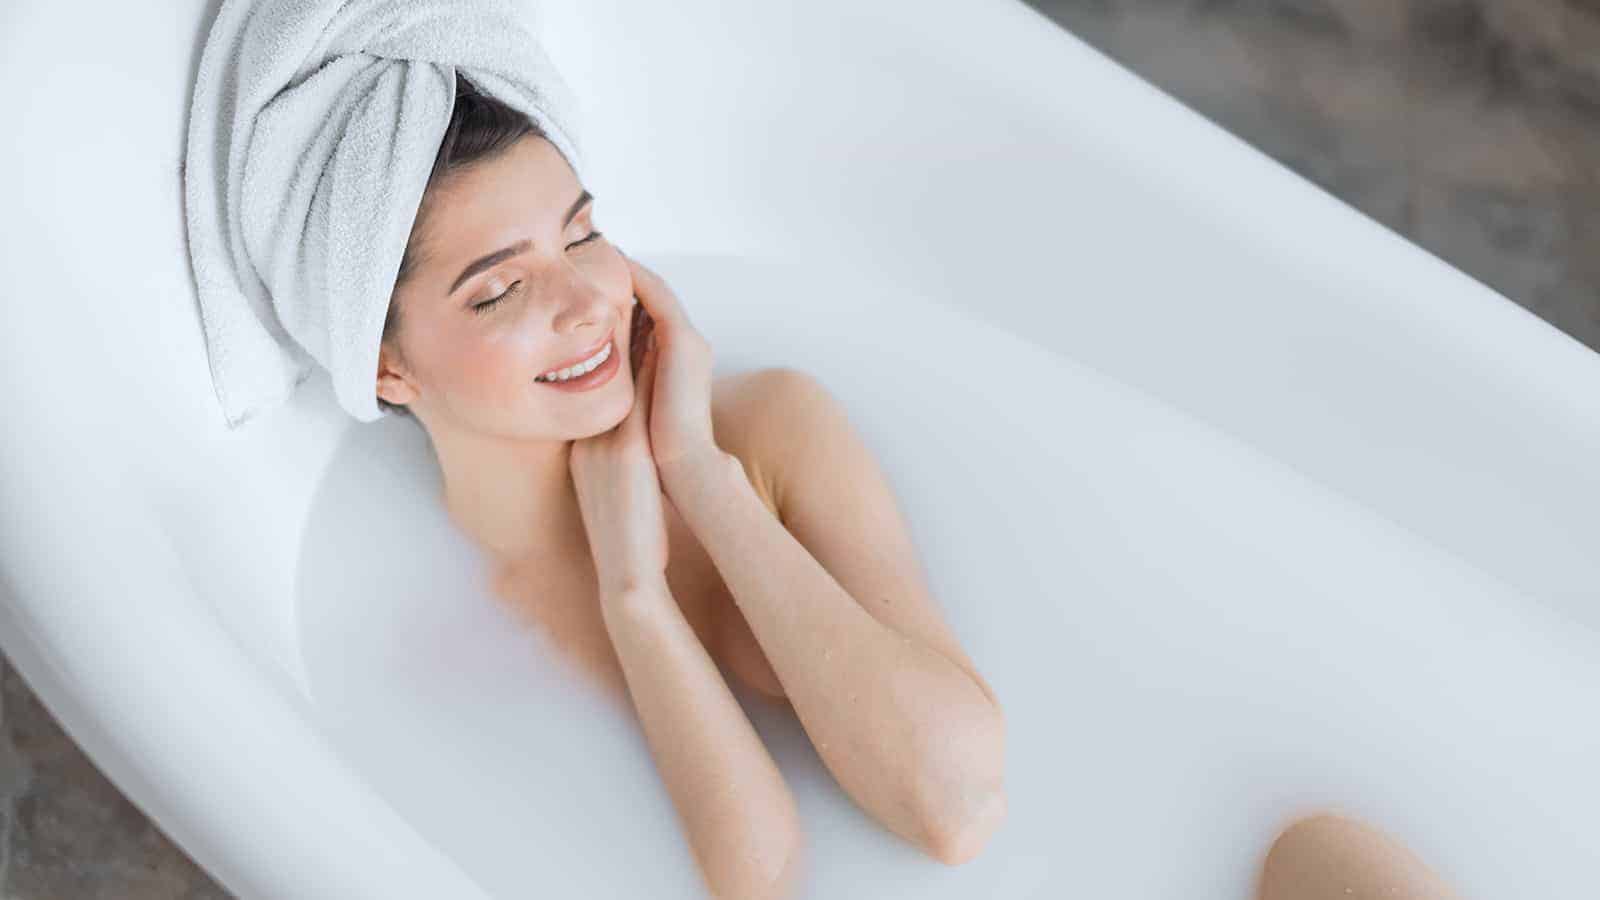 6 Benefits of Taking a Milk Bath (and How to Do It)